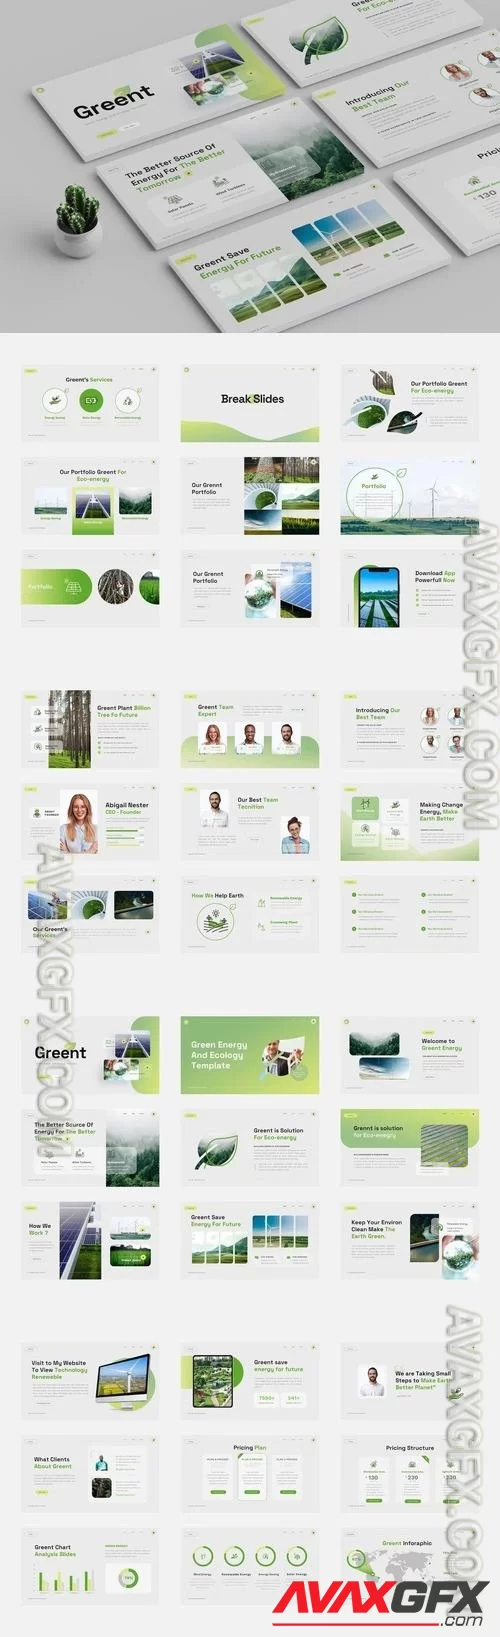 Green Energy and Ecology Powerpoint Template L9JVS54 [PPTX]